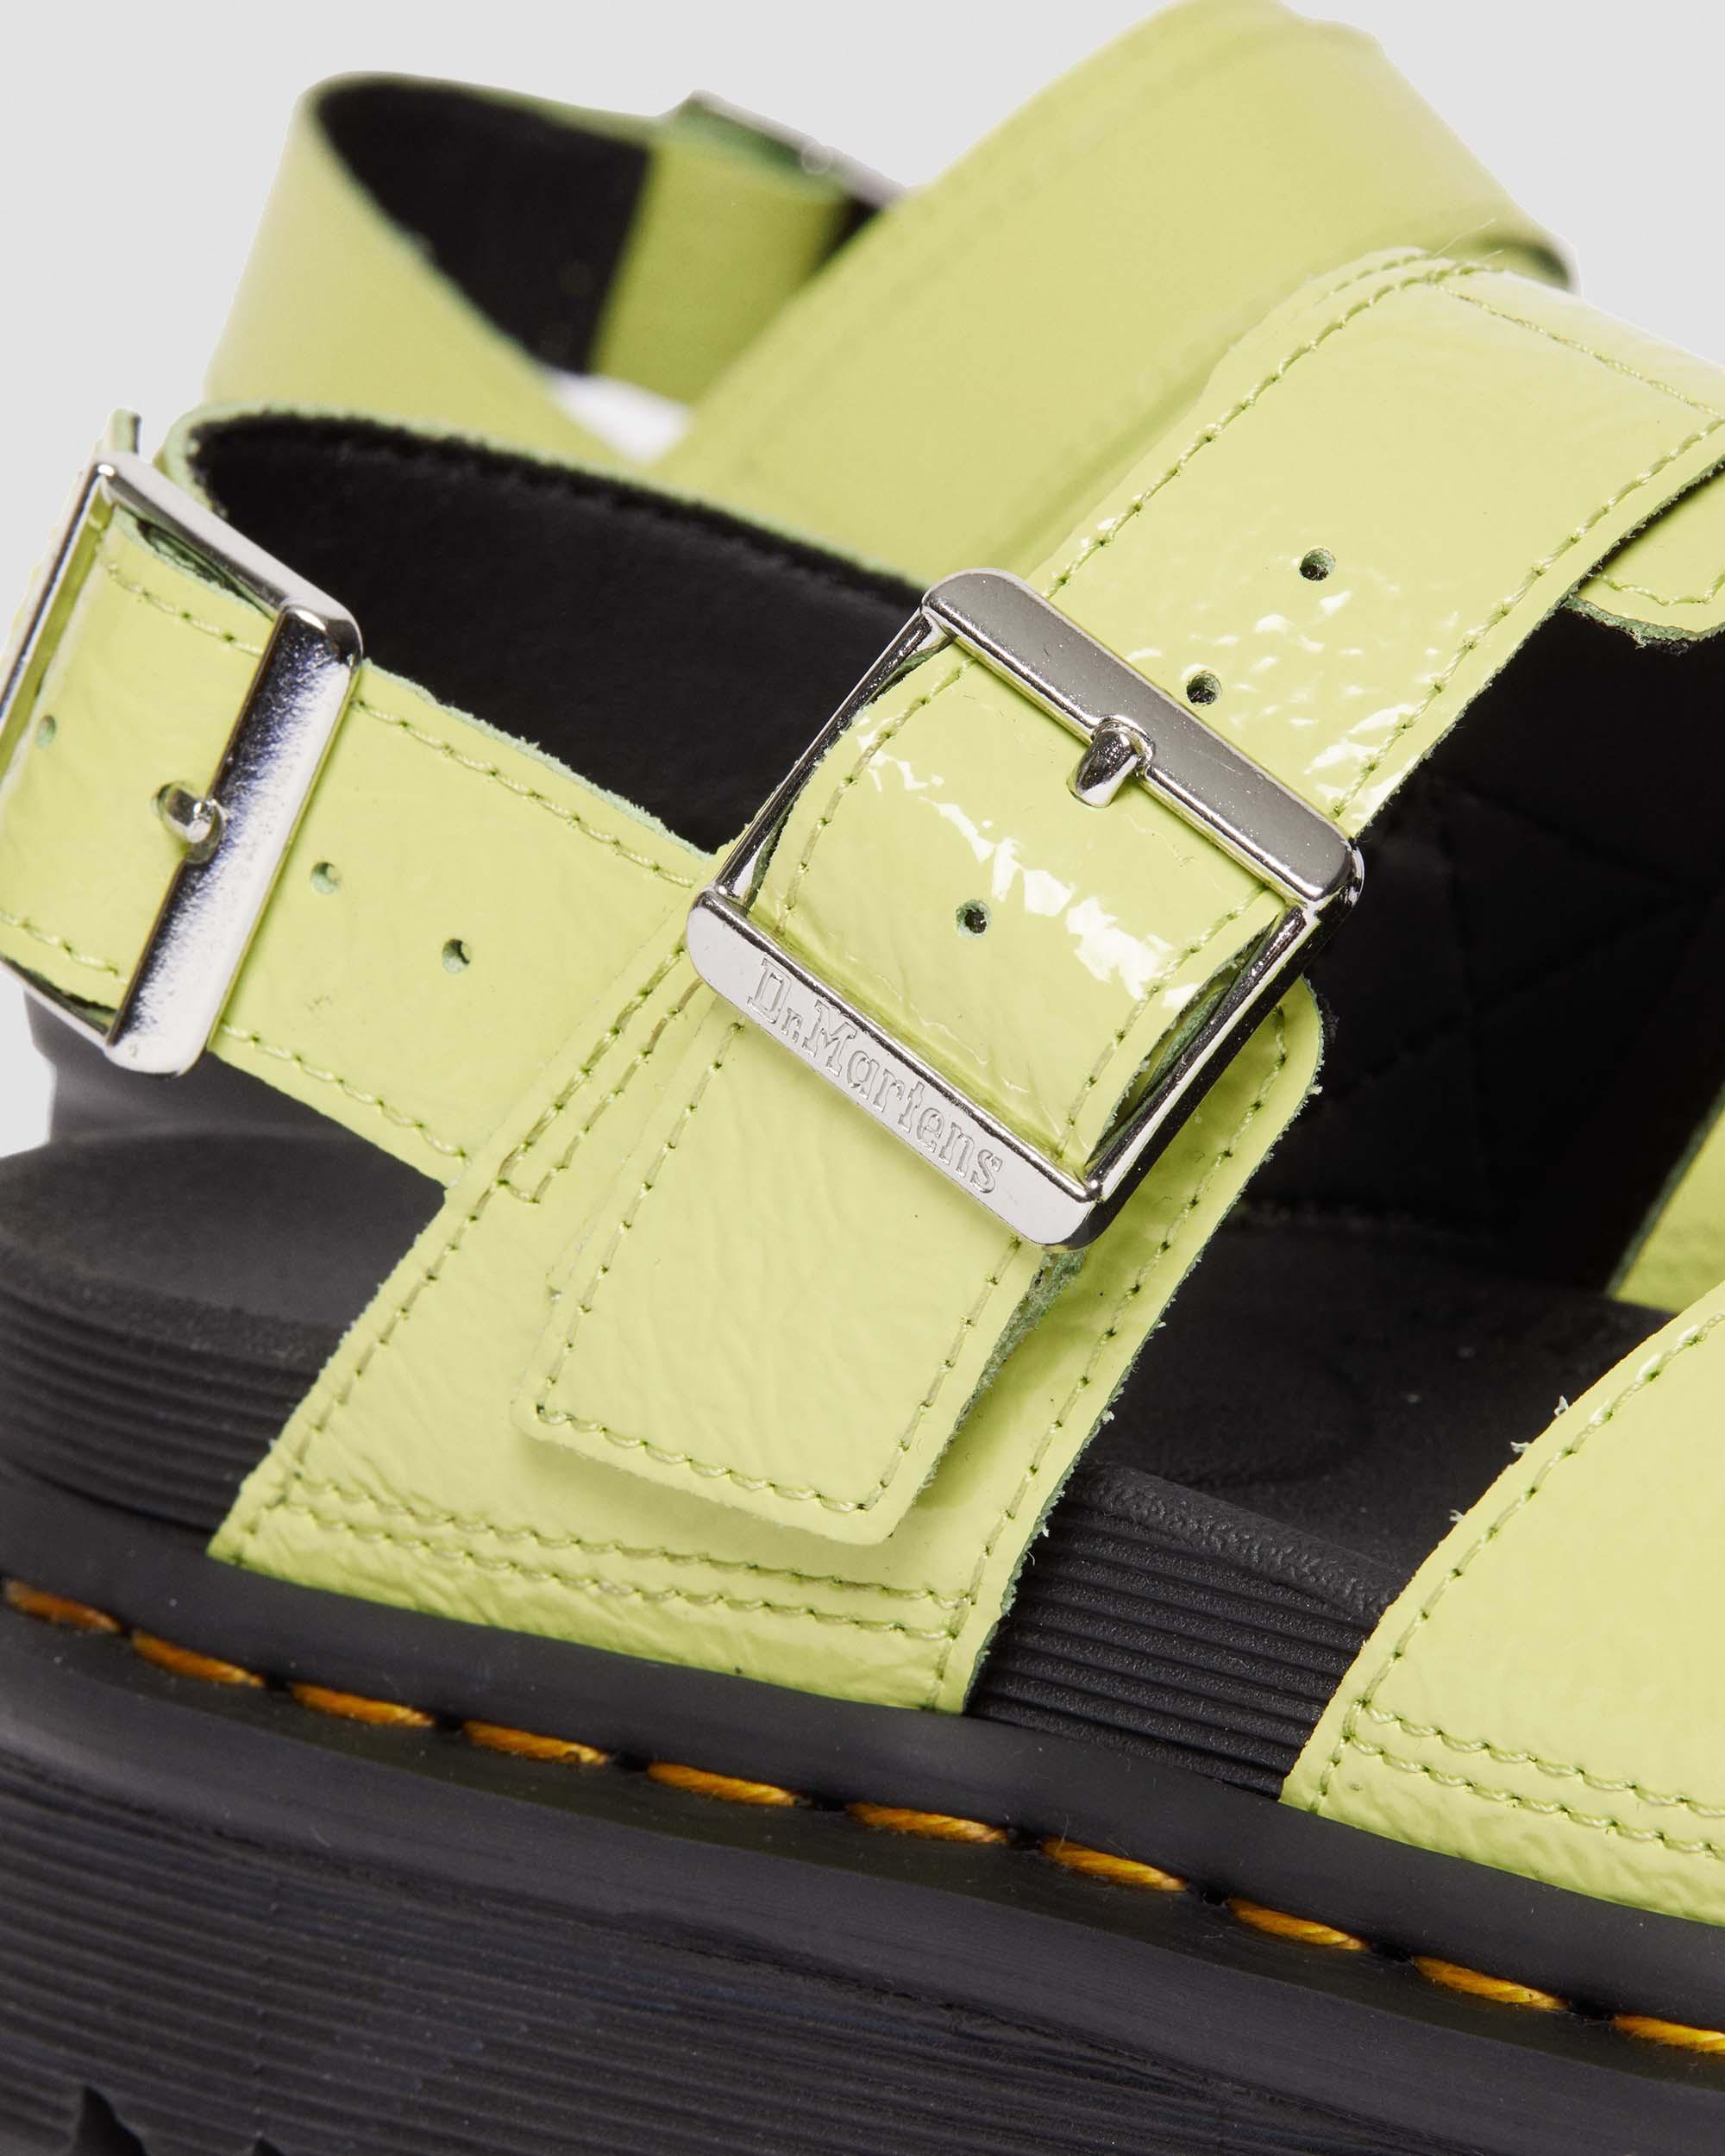 Voss II Distressed Patent Leather Sandals in Lime Green